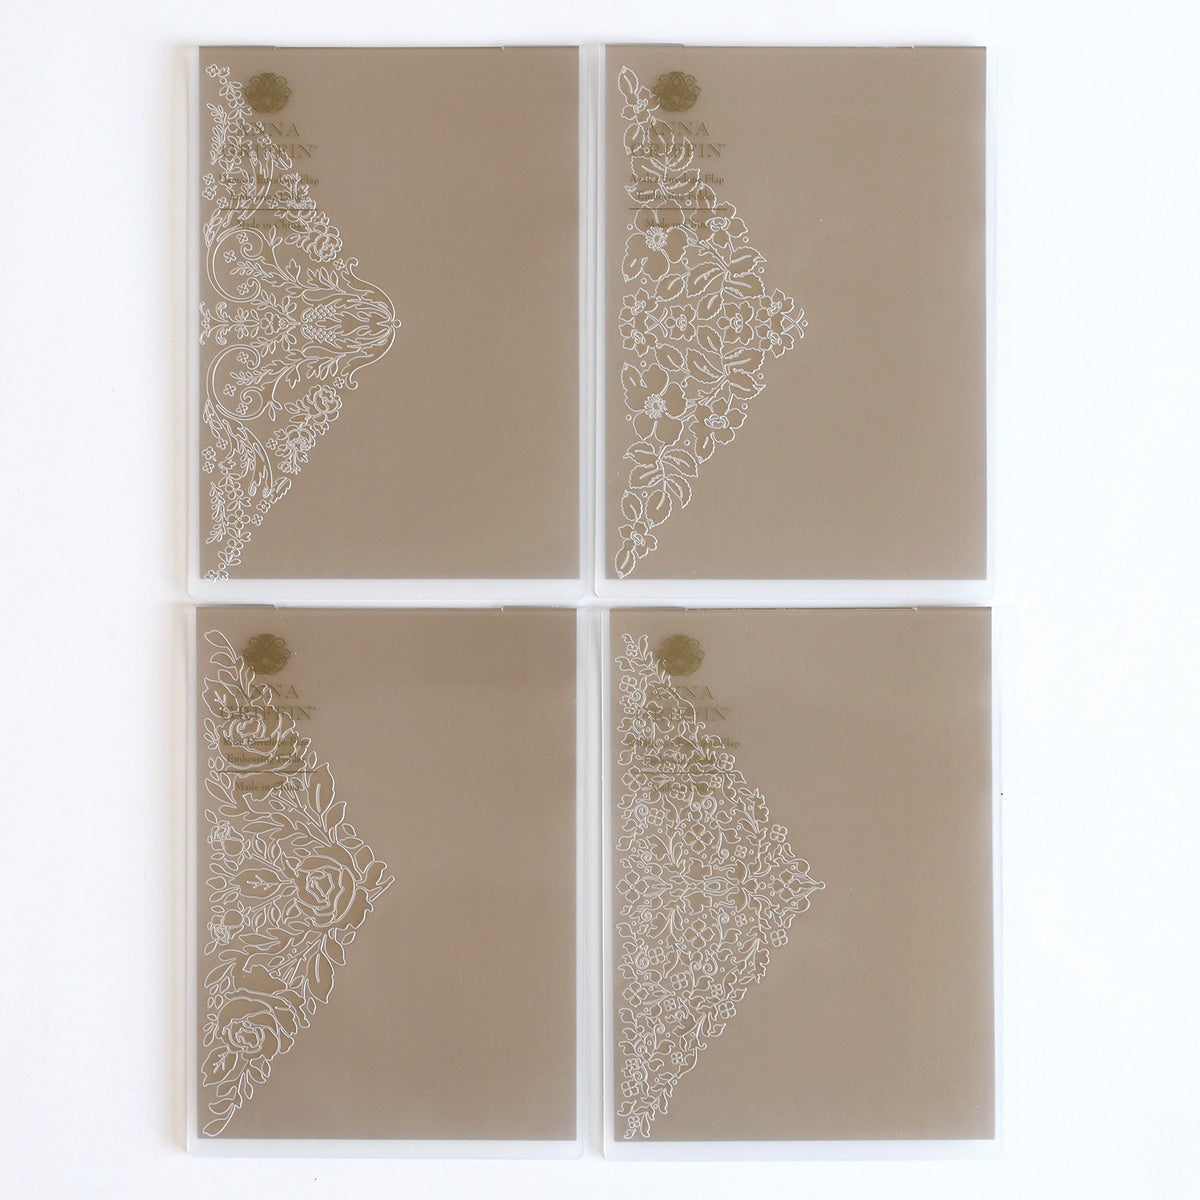 four pieces of glass with white designs on them.